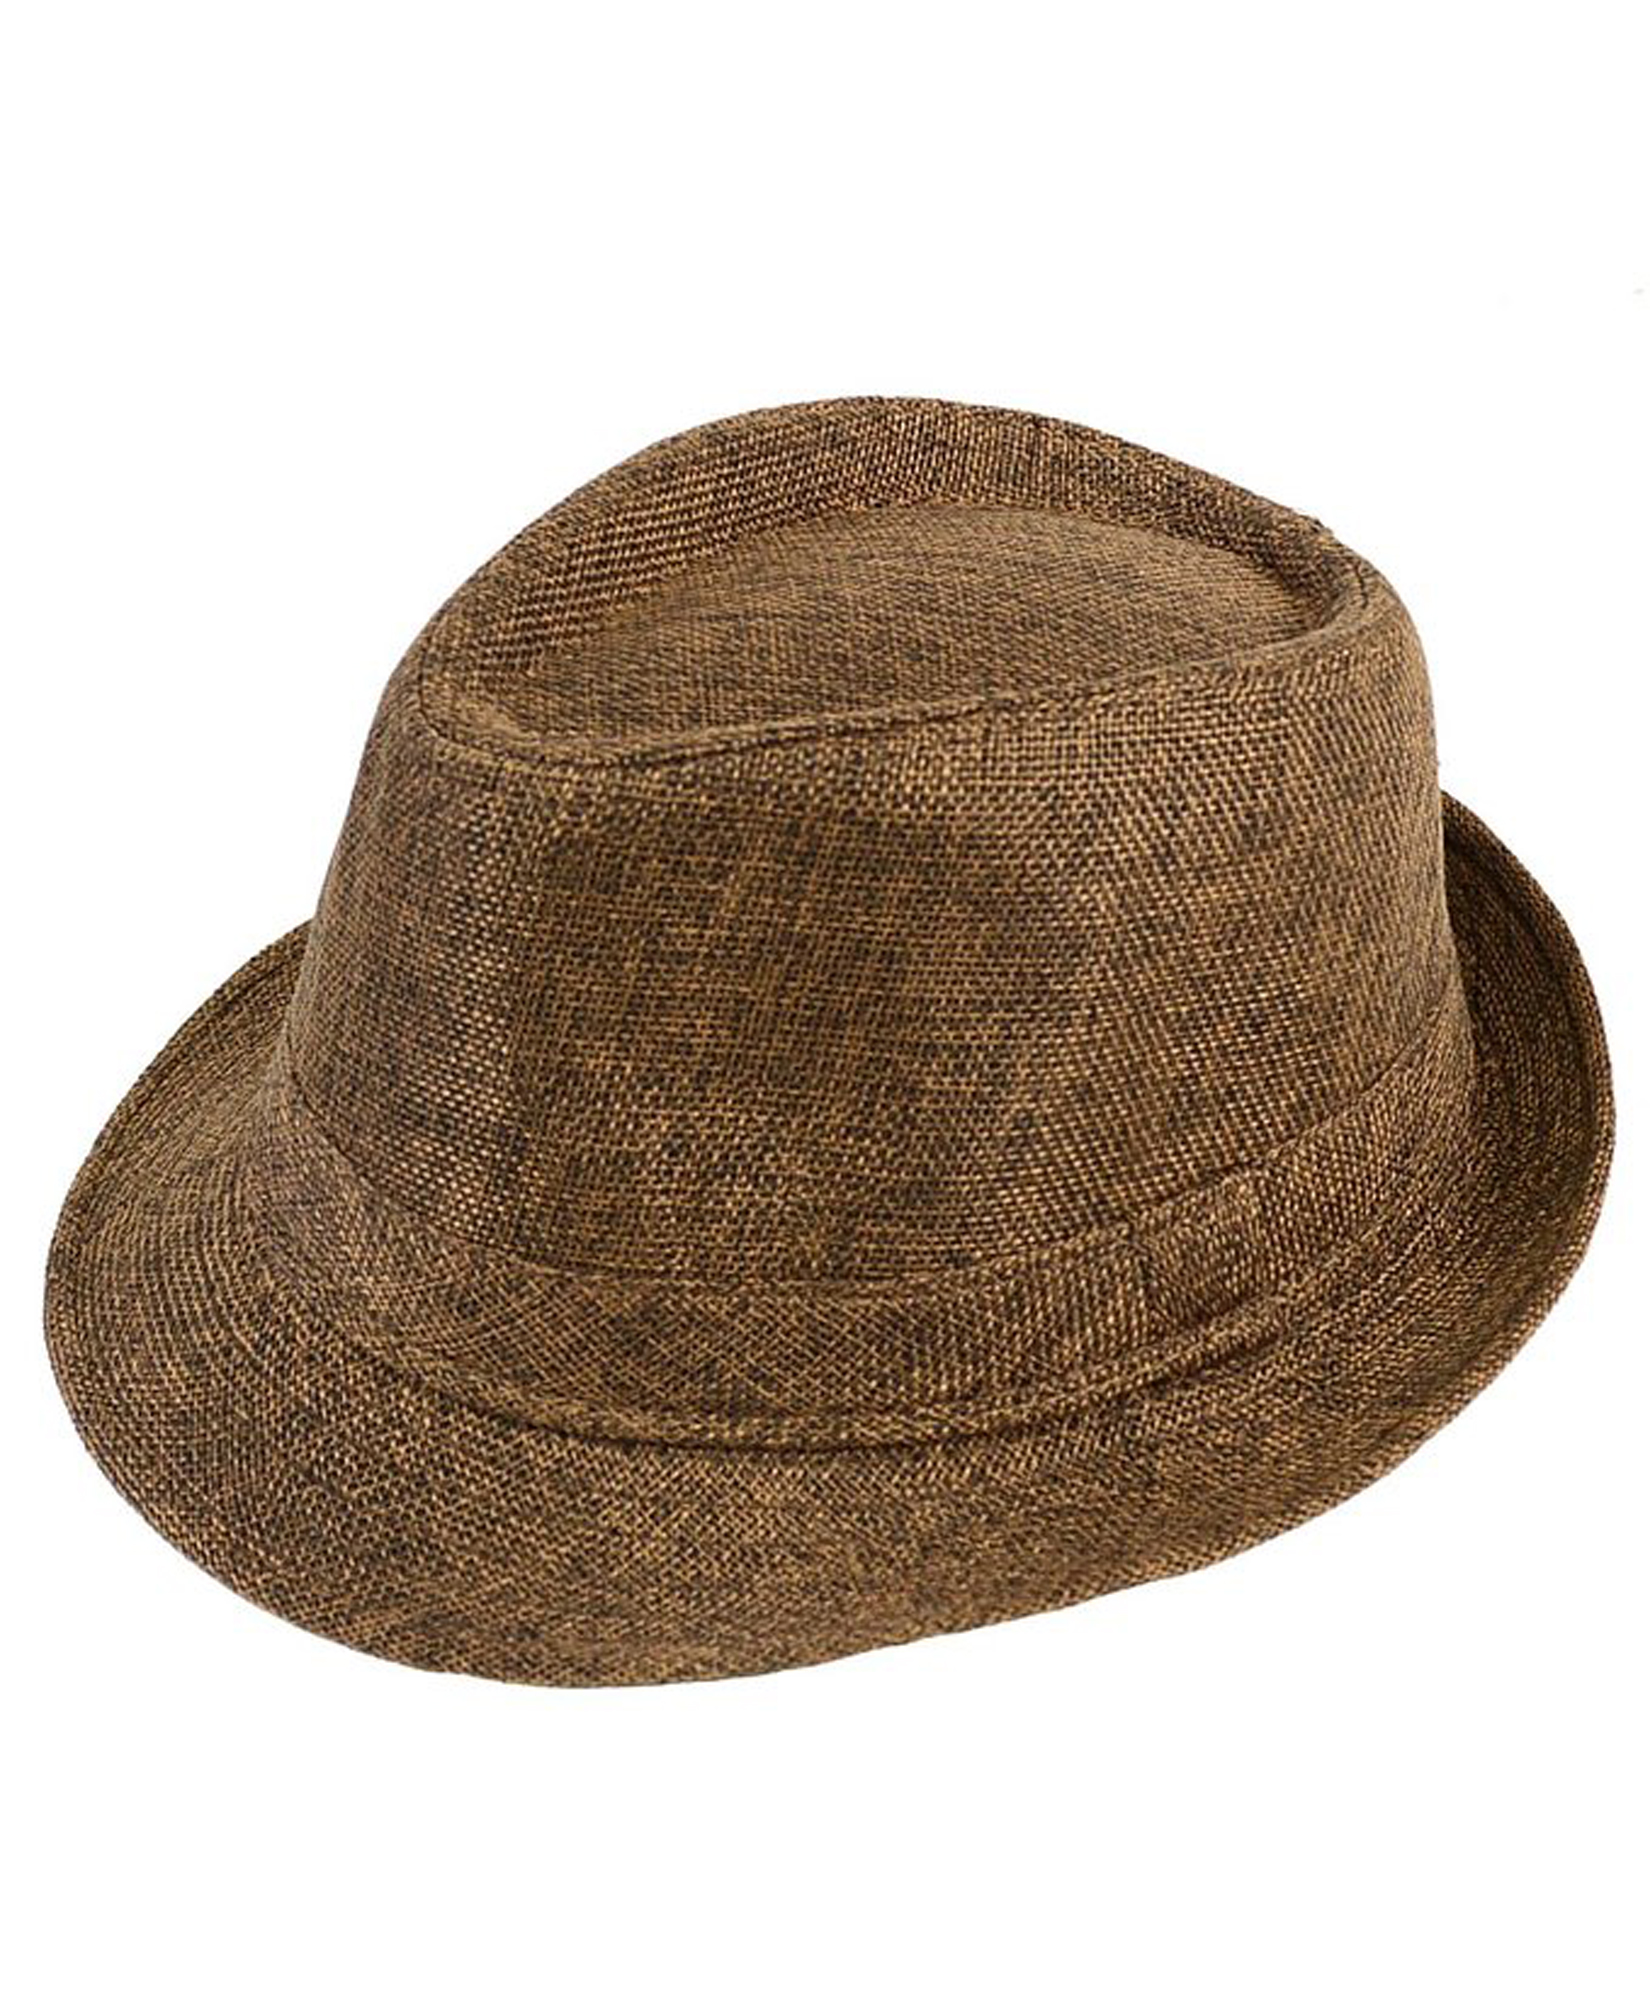 Men's Spring Summer Classic Fashion Solid Fedora Hats